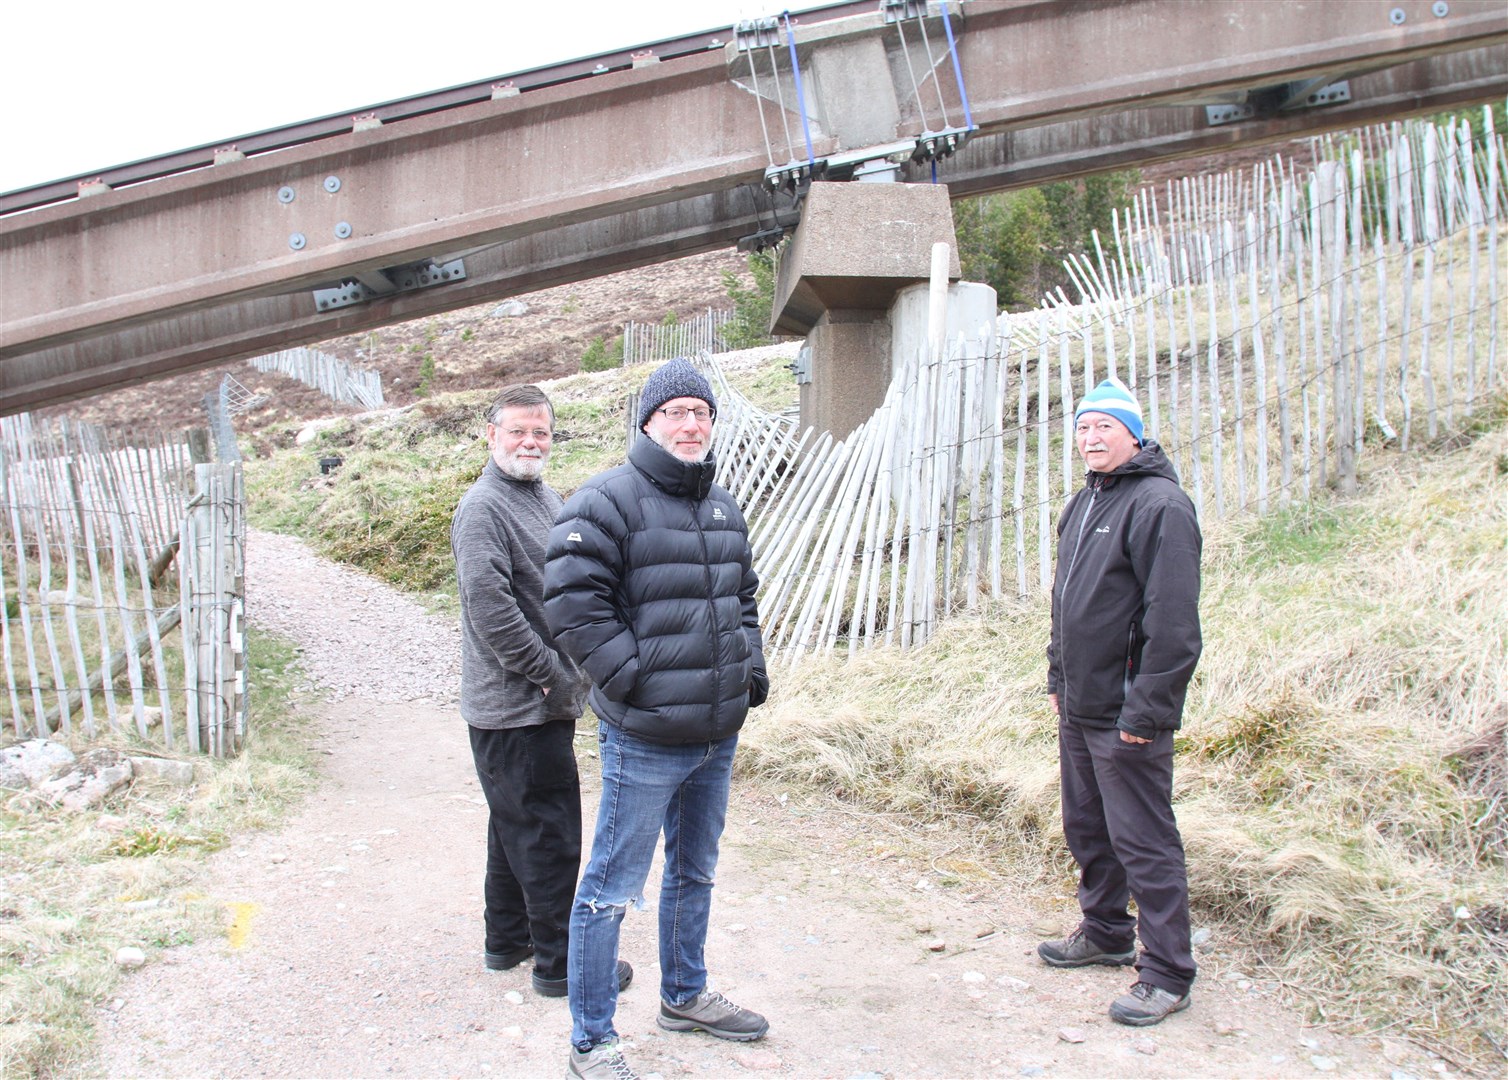 Stuart MacAulay, Mike Marcus and John Talbot look over the scarf joints which have been at the heart of the problem keeping the funicular out of operation.